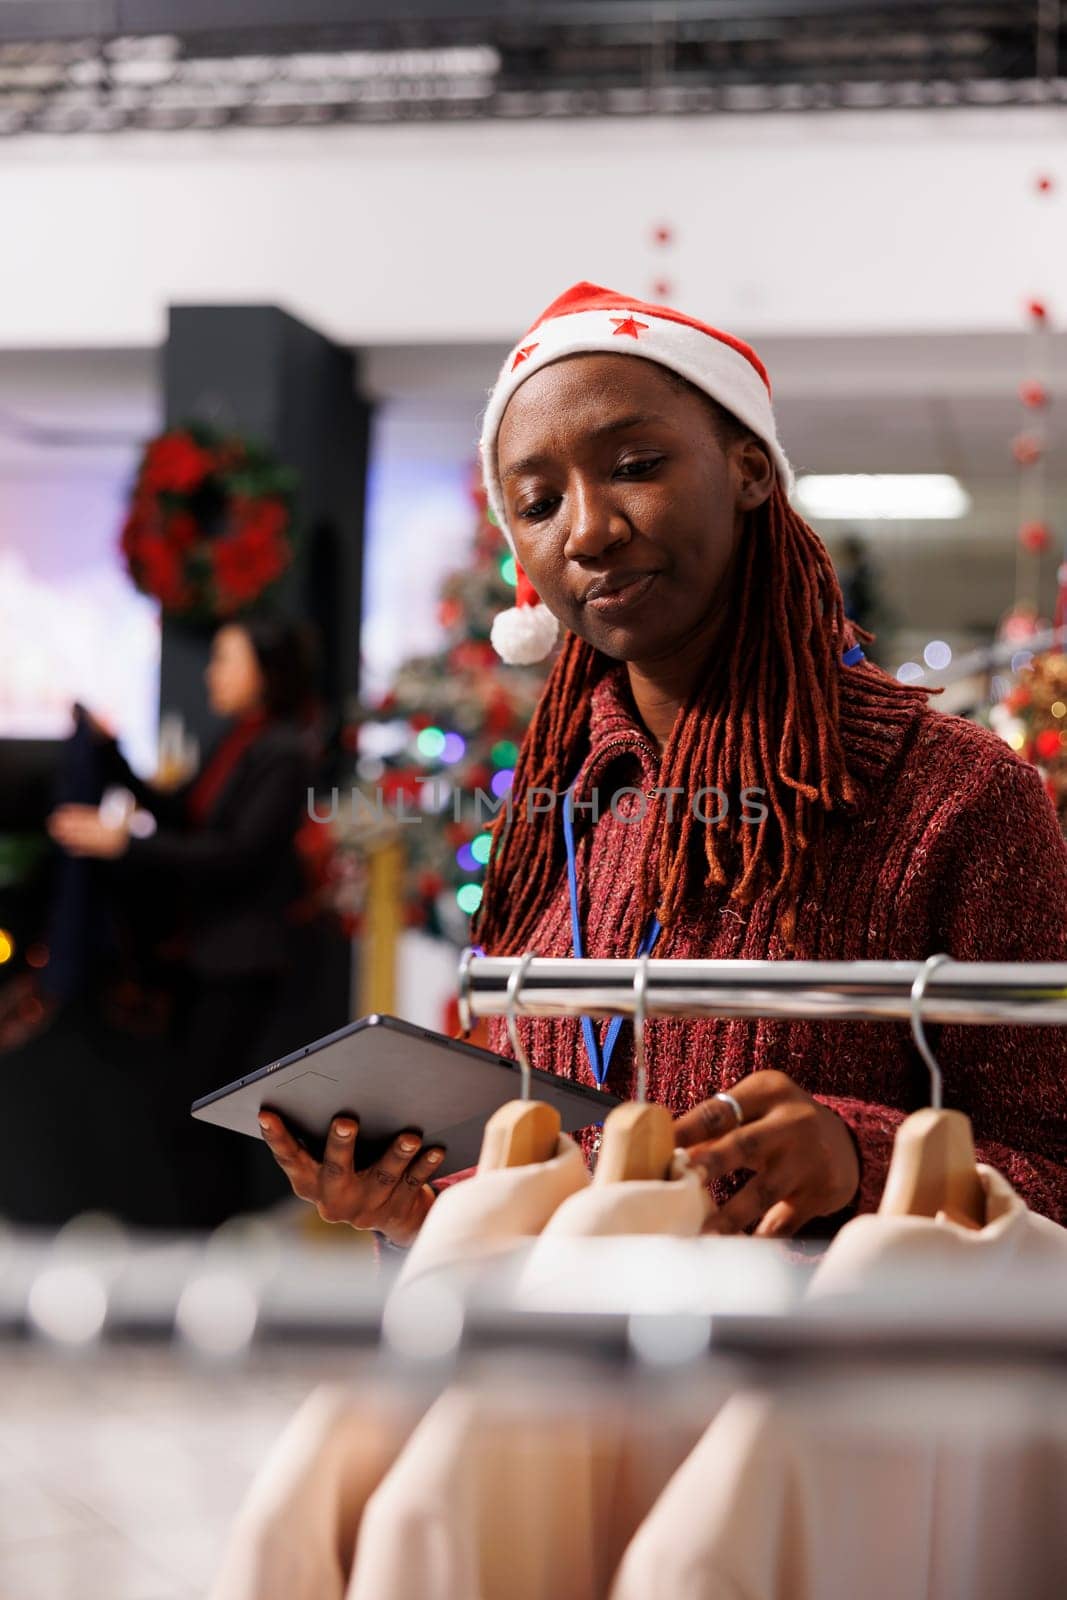 Sales manager checks inventory list with clothing items in retail store, working on stock during christmas holiday season. Woman with santa hat counting merchandise on racks, festive boutique.